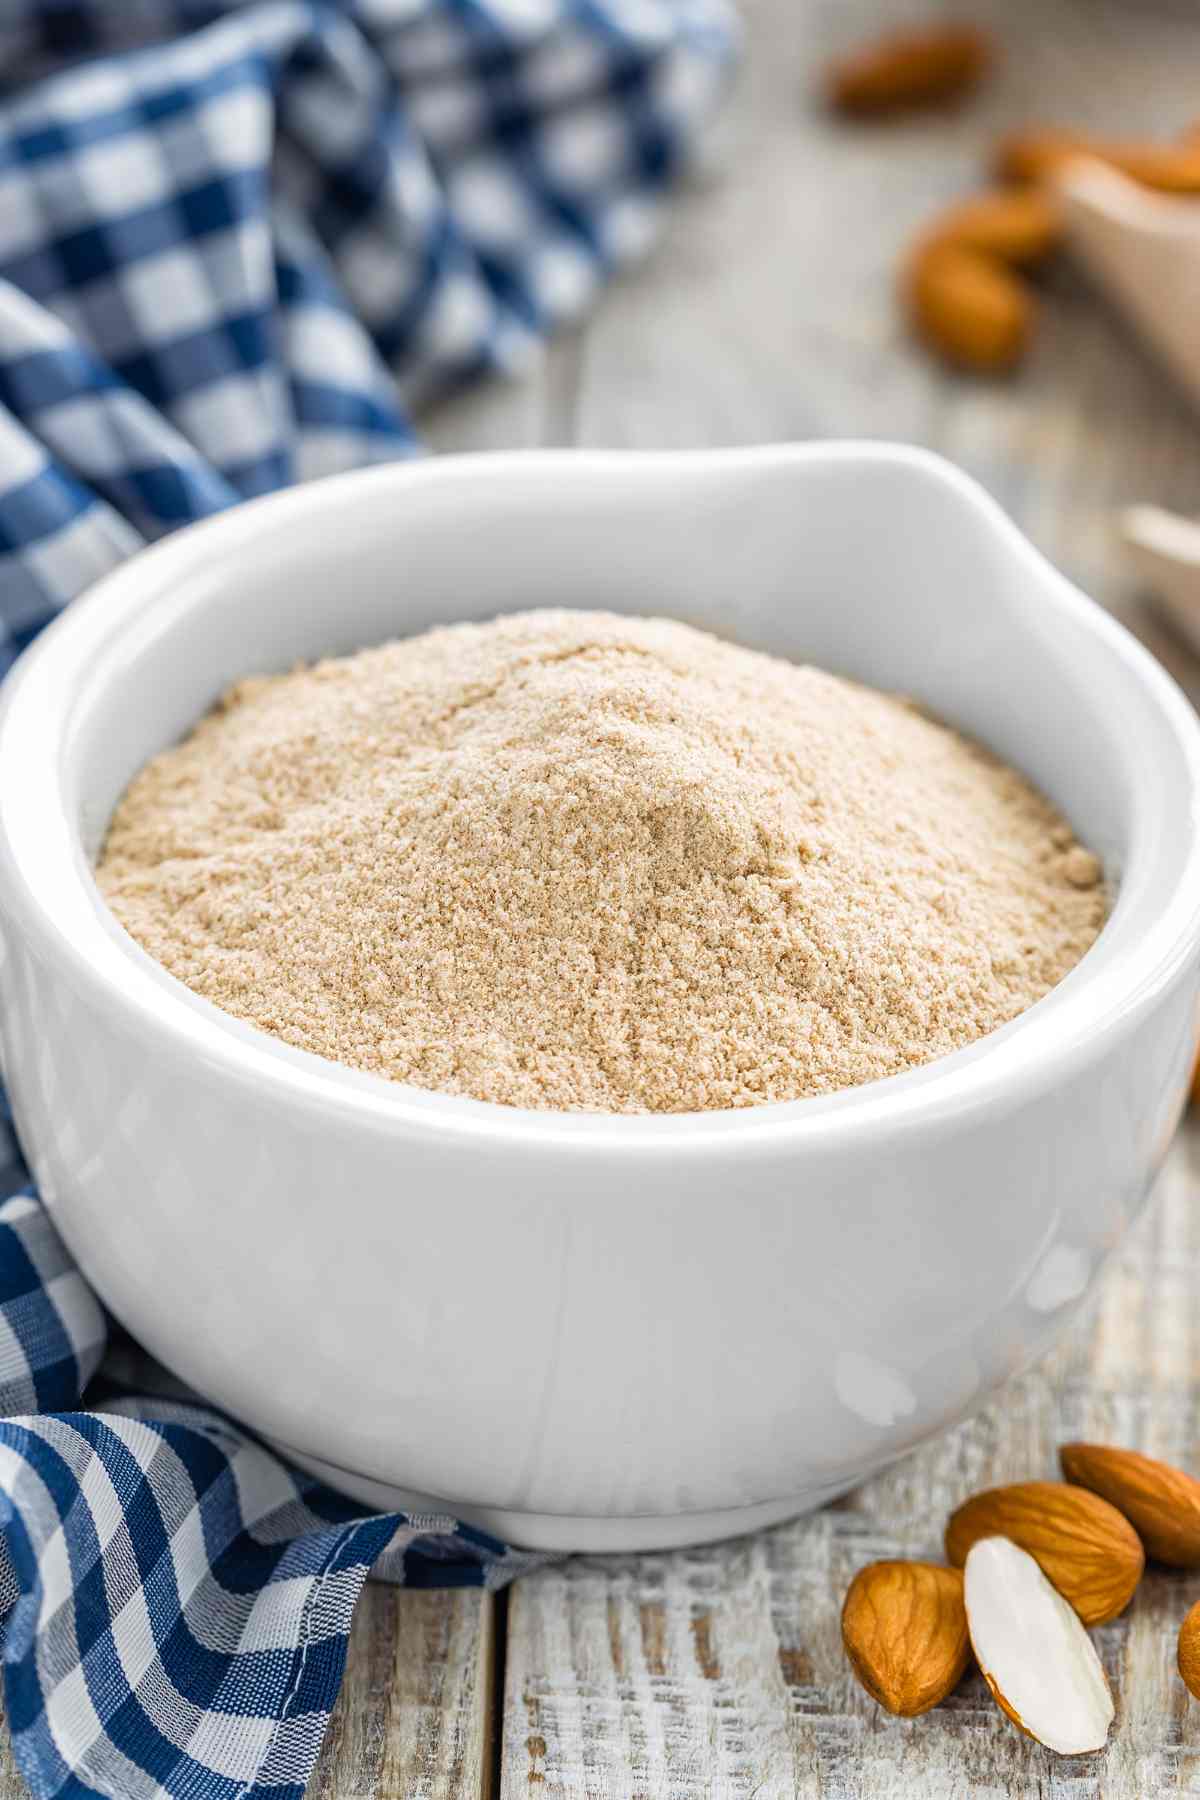 Is almond flour compatible with the keto diet? How many carbs can you expect from a serving of almond flour? Keep reading to get all the facts on this low-carb alternative to wheat flour.